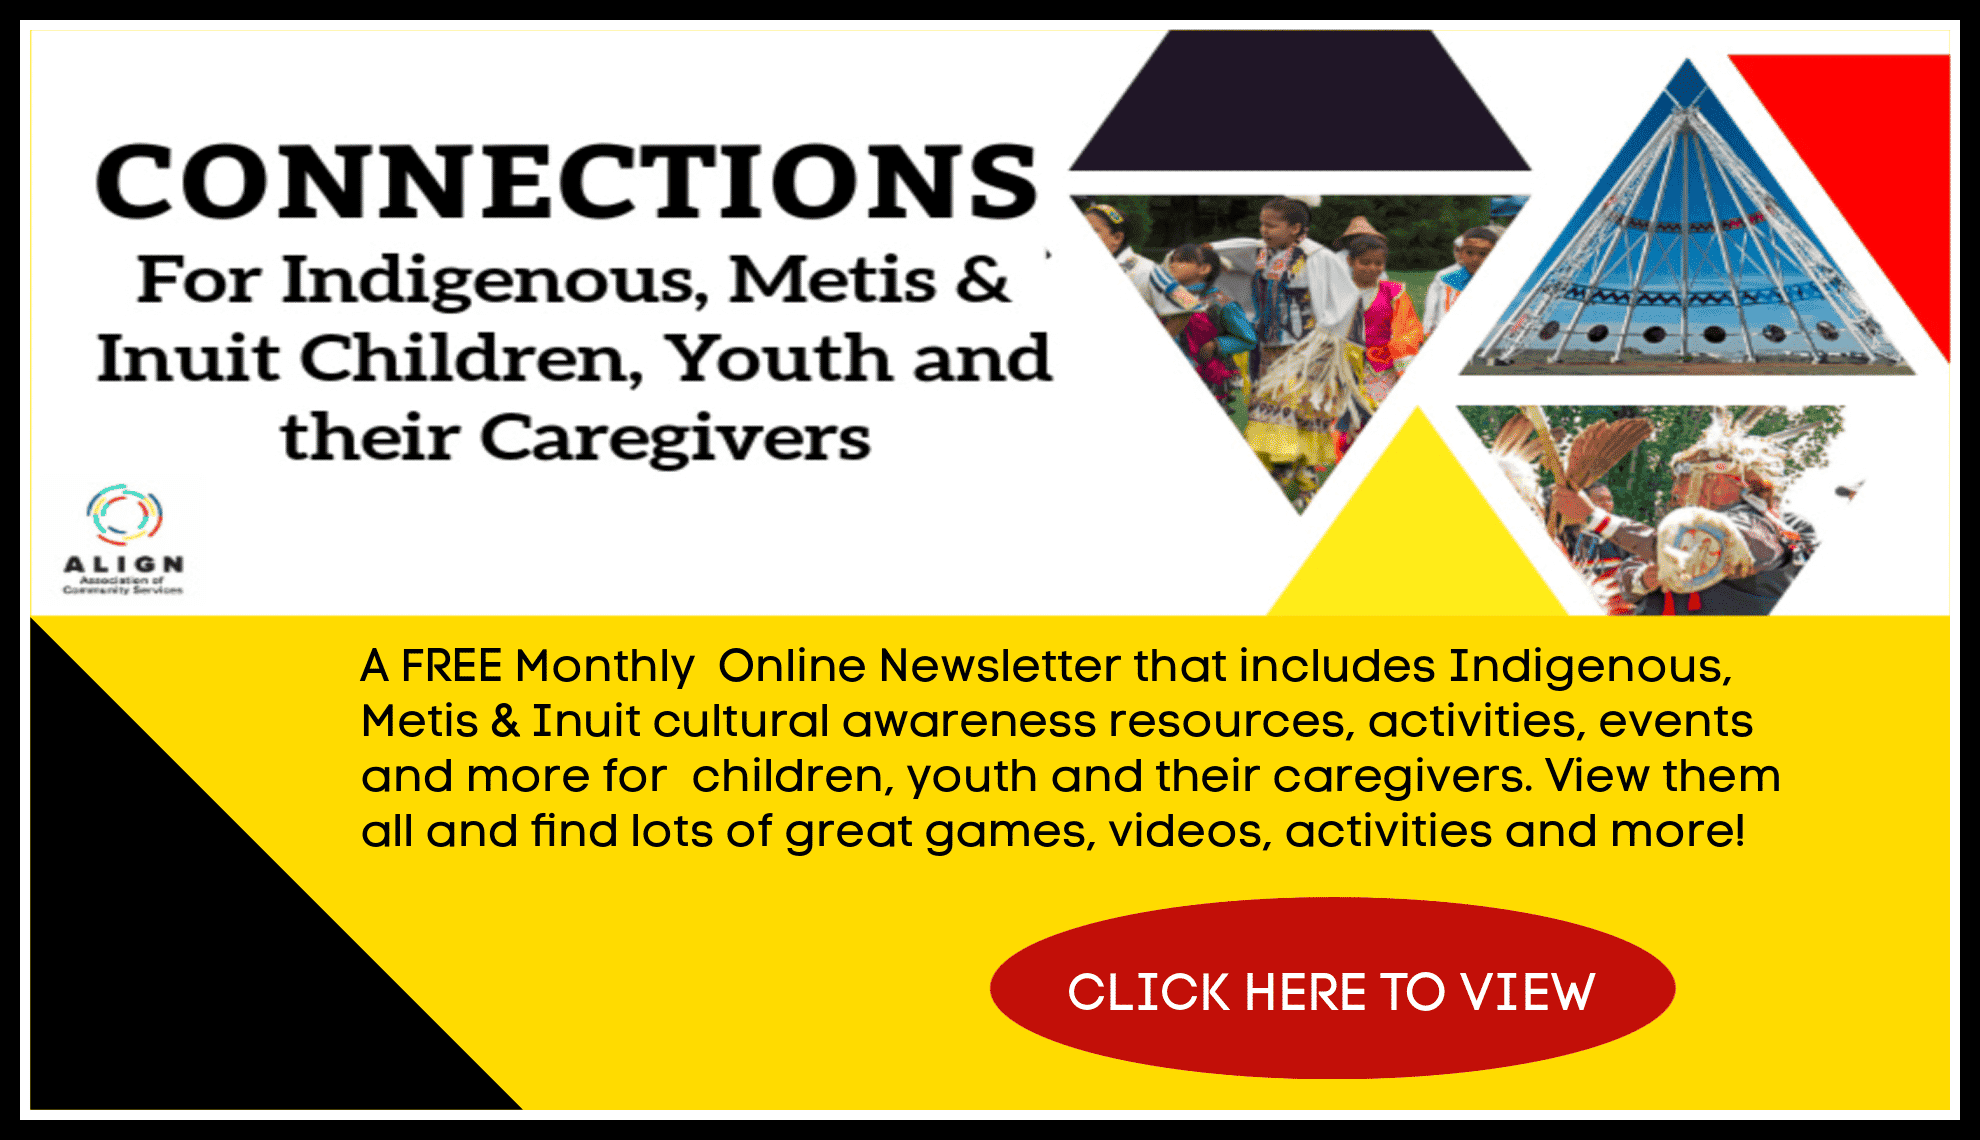 ALIGN CONNECTIONS FOR INDIGENOUS CHILDREN, YOUTH & THEIR CAREGIVERS